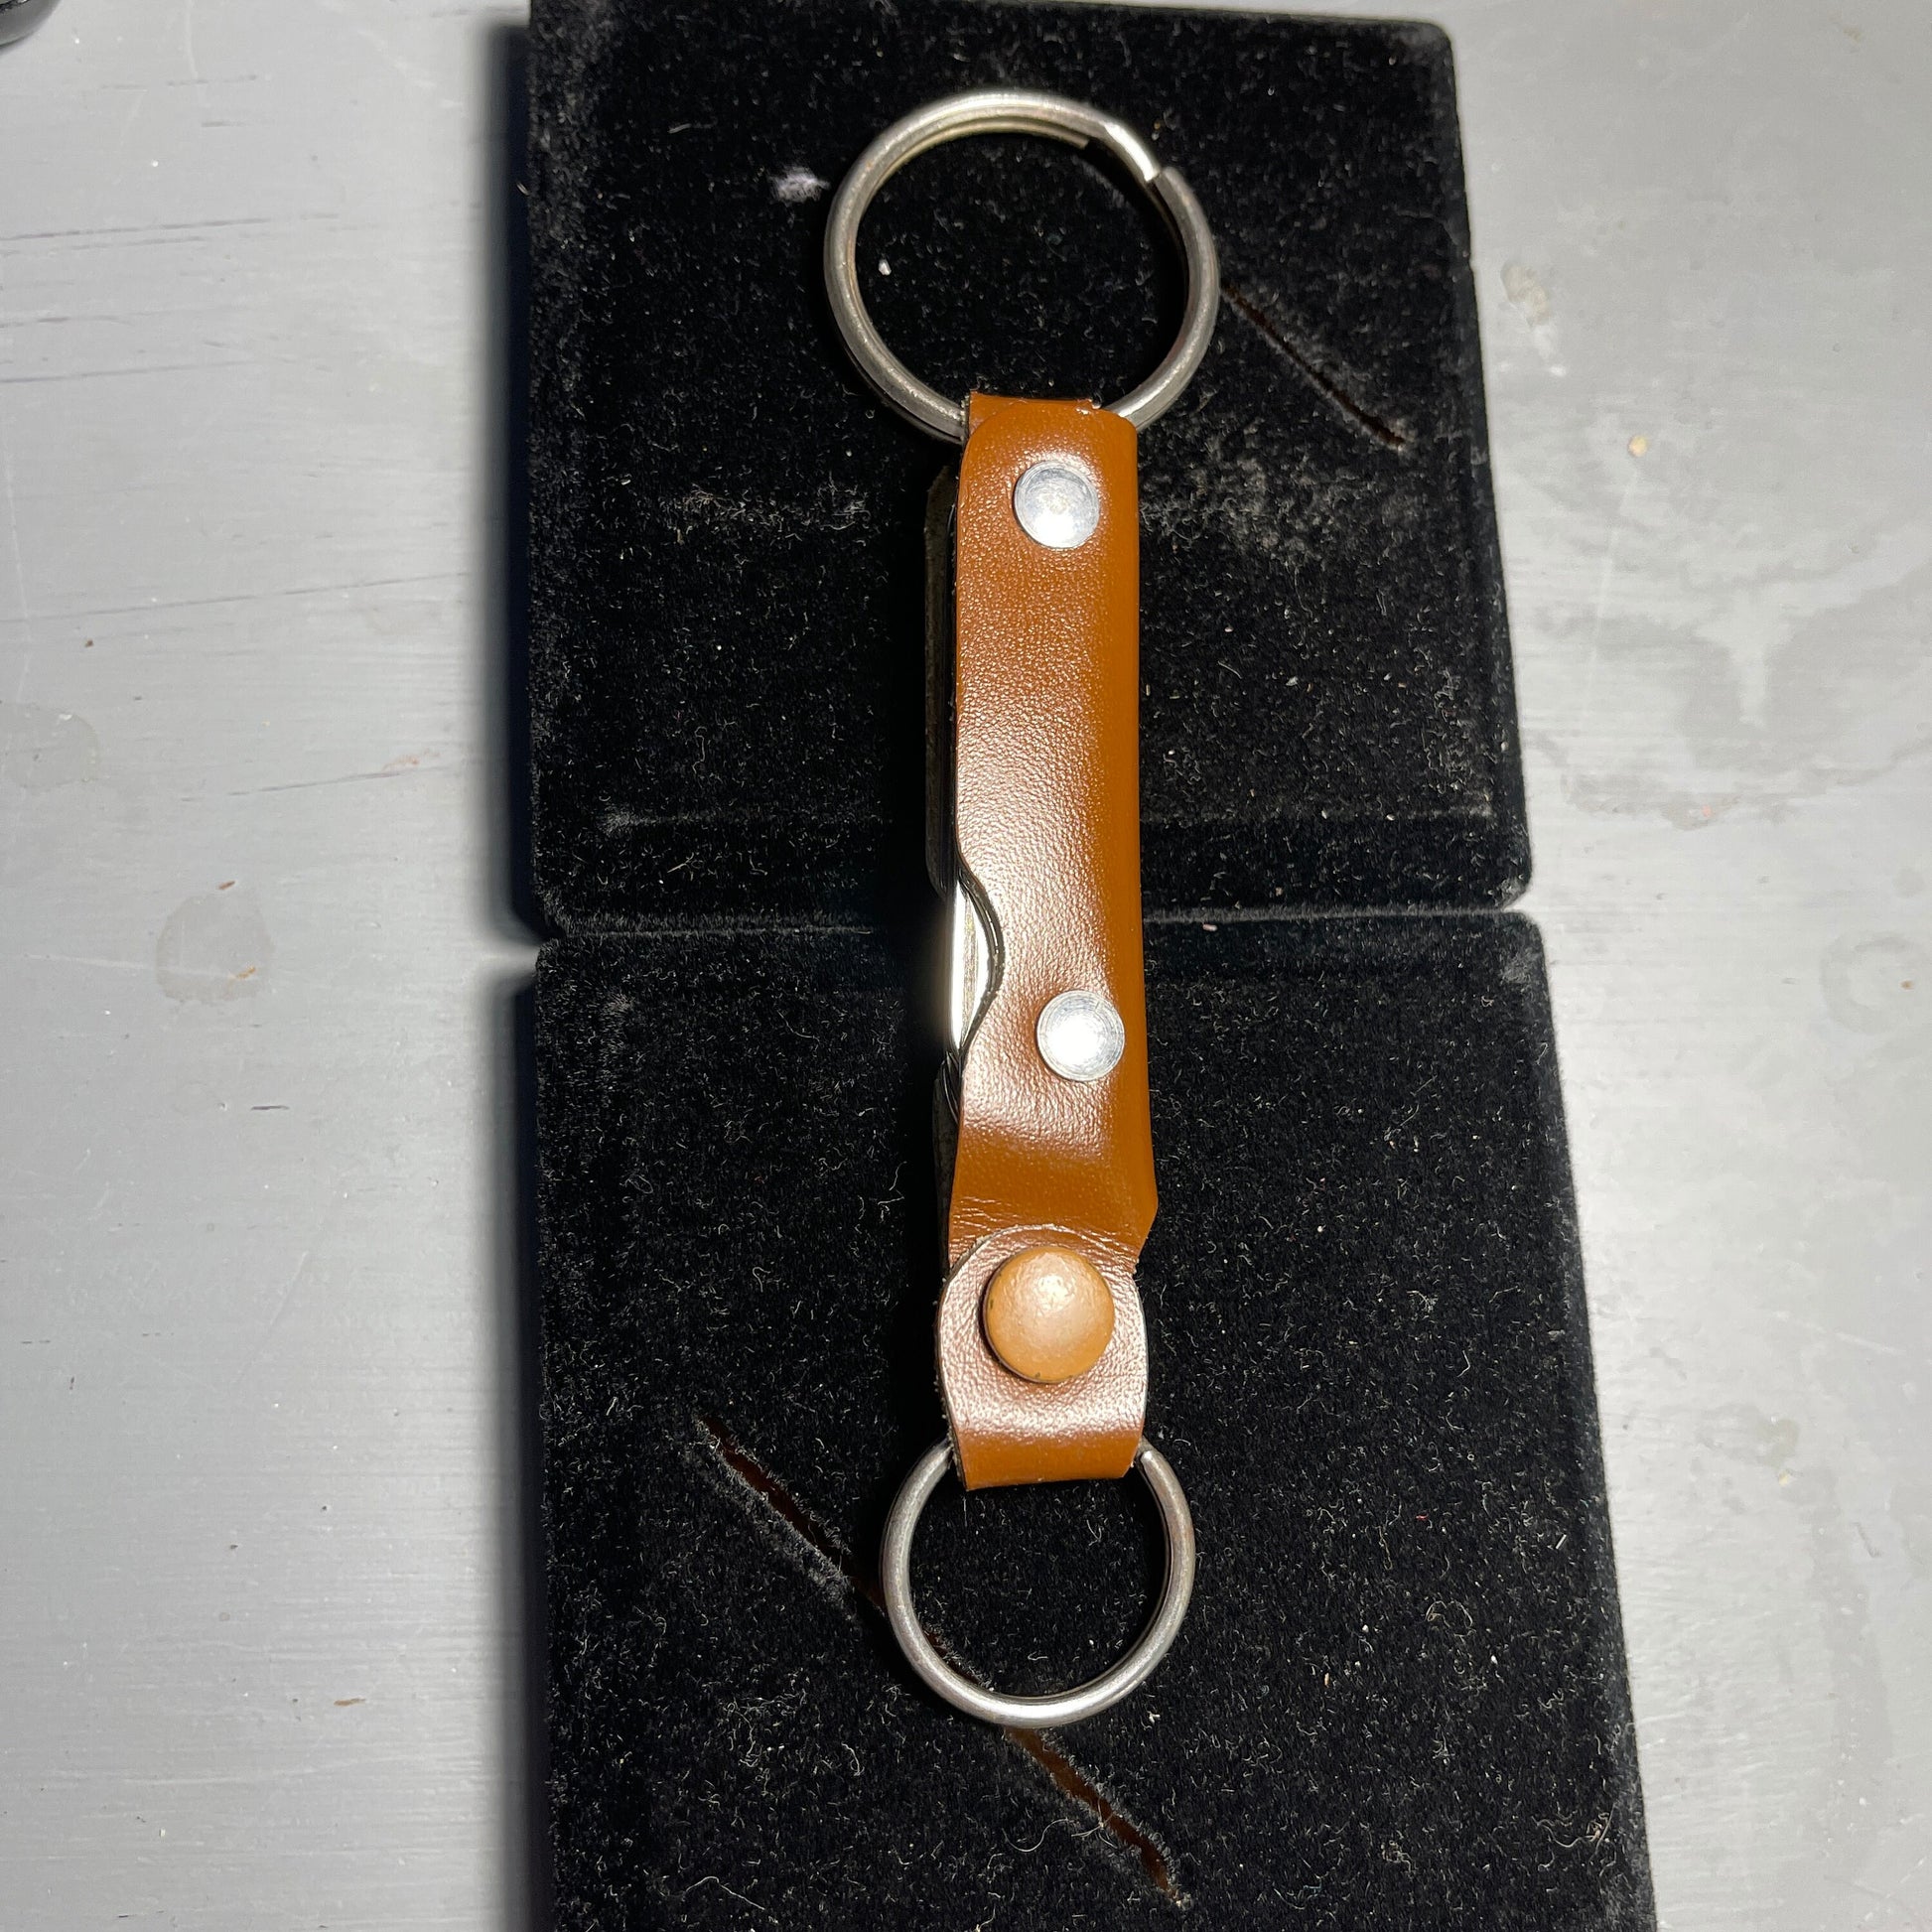 Leatherette Double Keyring with Folding Pocket Knife, Nail File, Bottle Opener, and Screwdriver inside, Vintage Collectible Tool